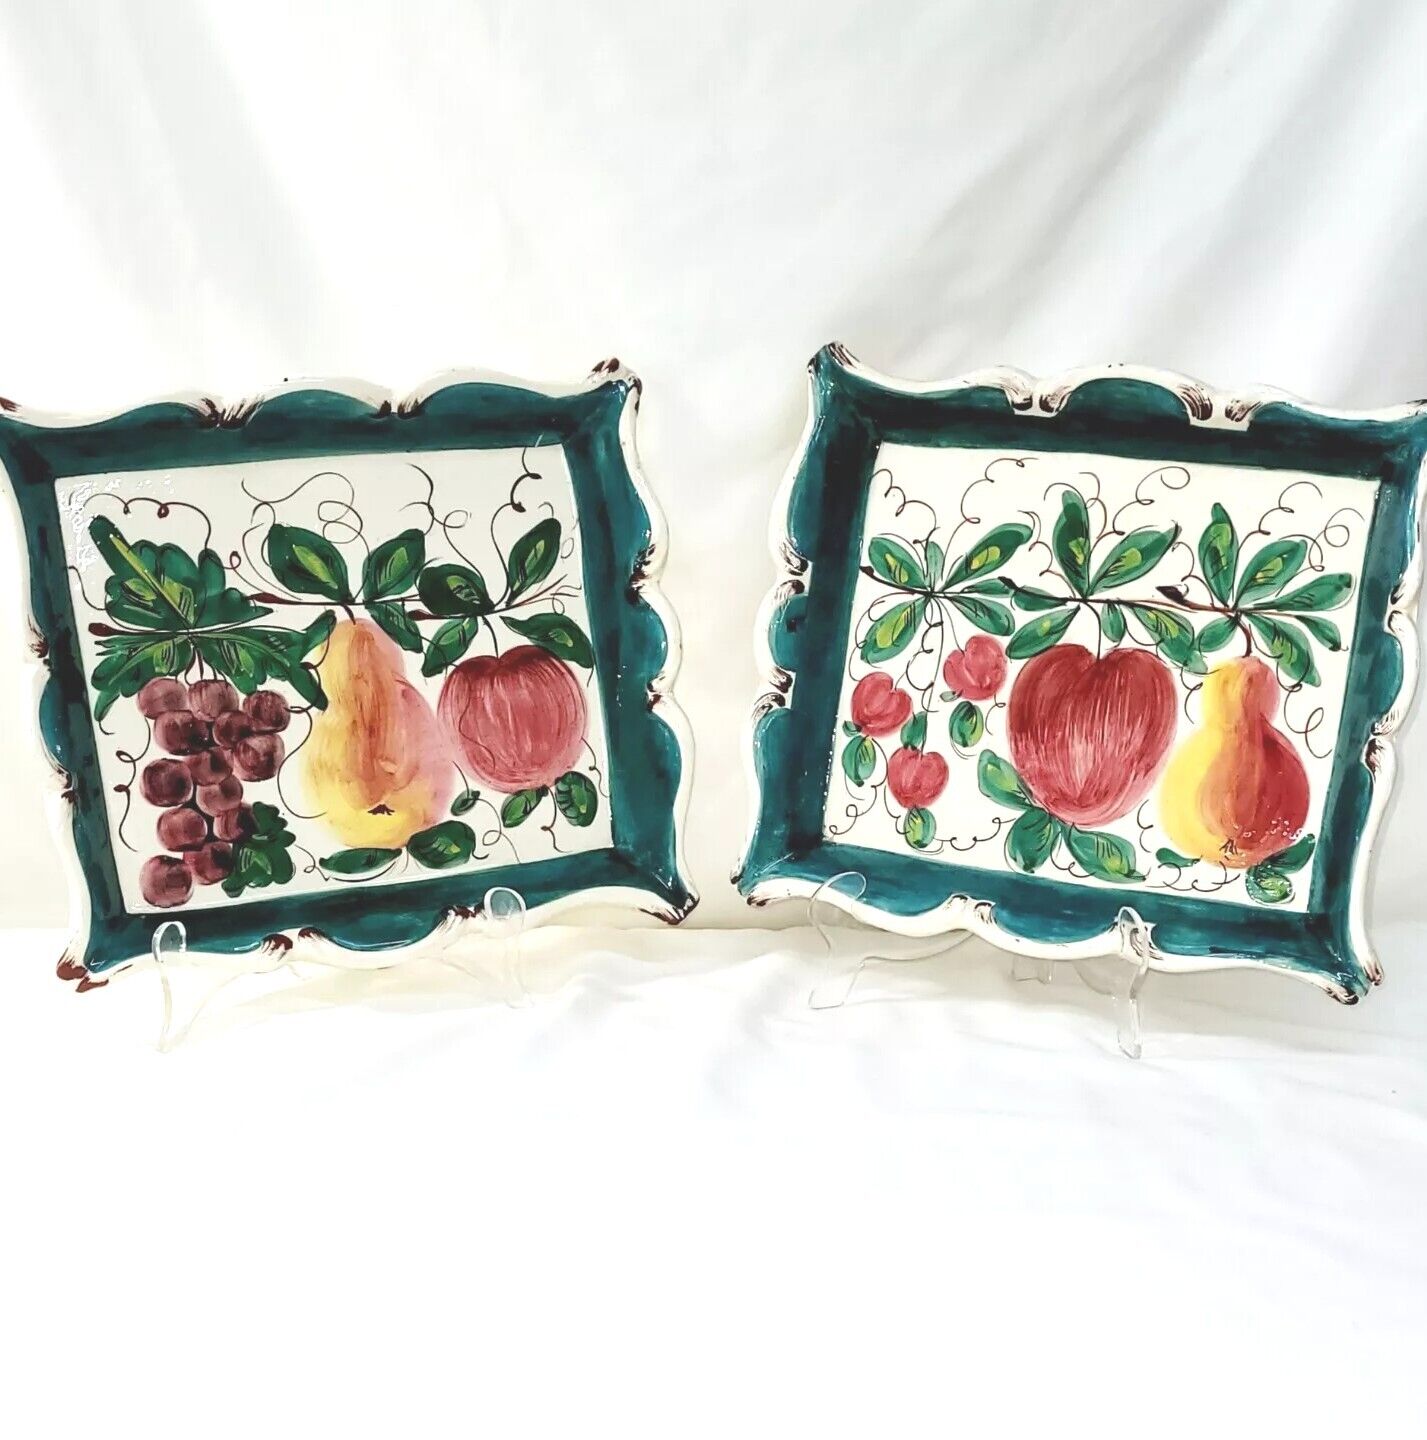 Set Of 2 Signed WCG Italy Ceramic Hand Painted Wall Art Decor With Fruit Design 